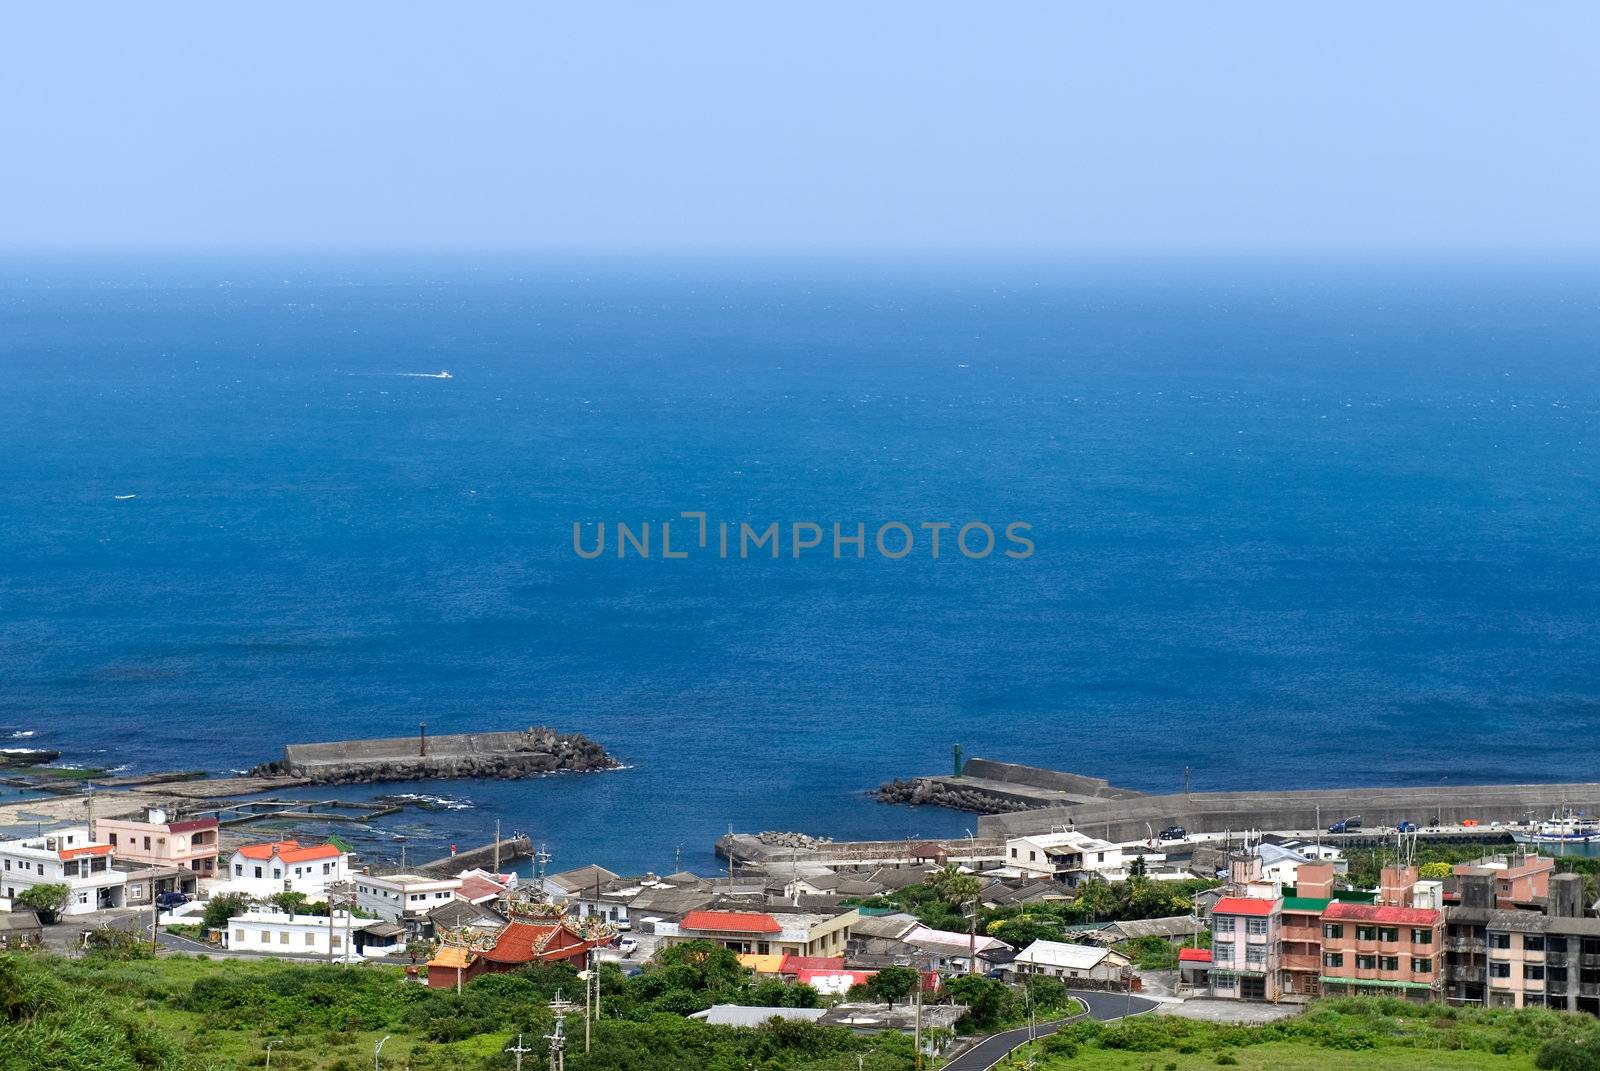 It is a beautiful seascape of small town and blue sea water.